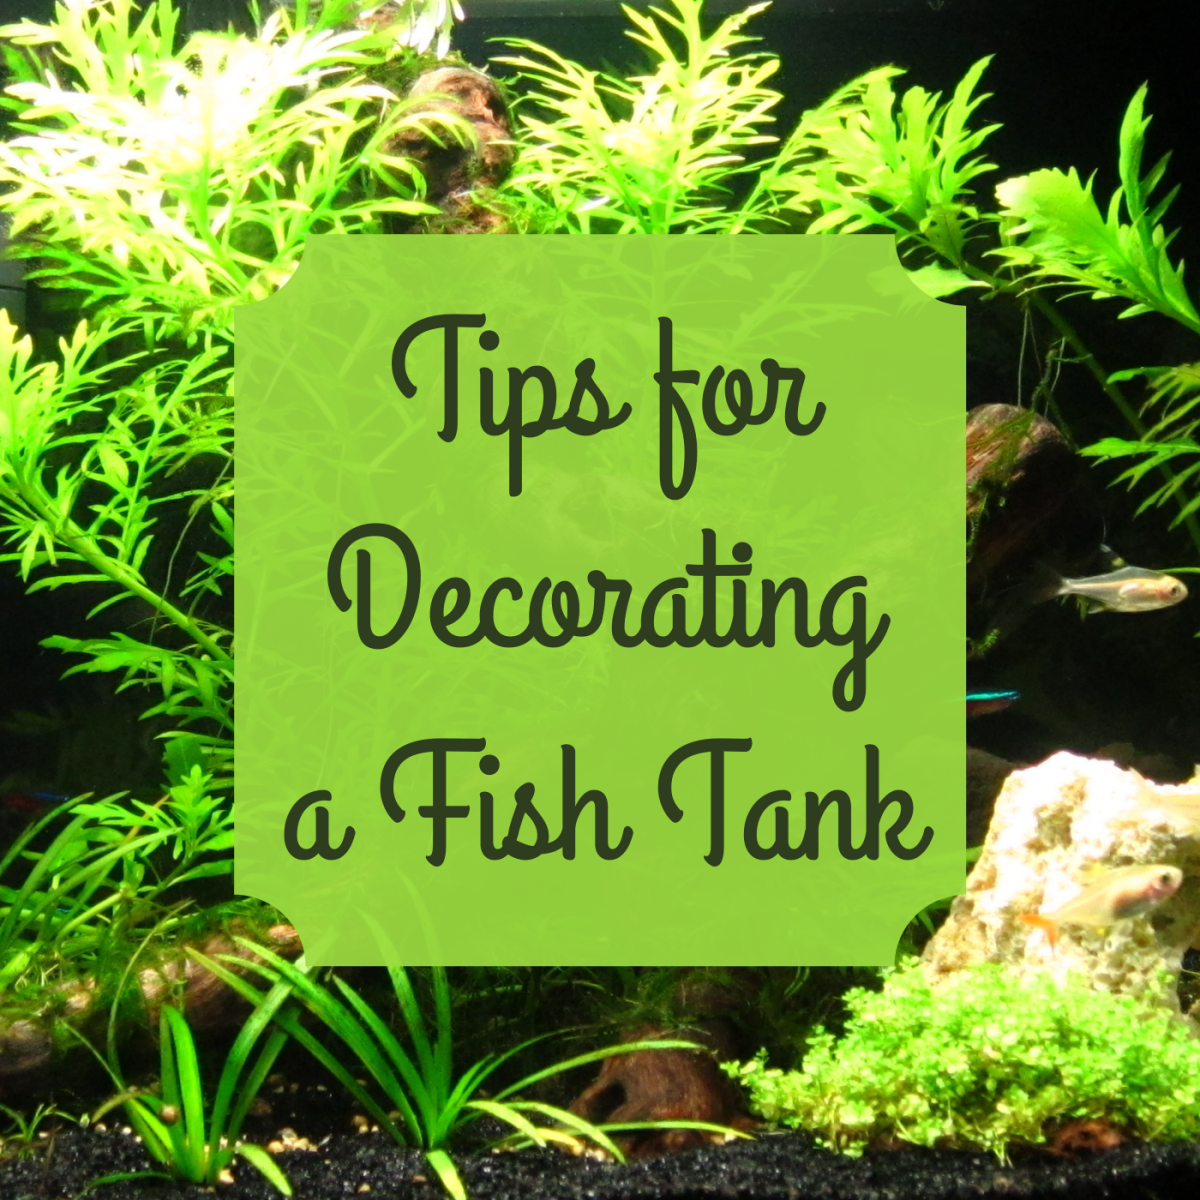 Get ideas for creating an aquarium that will delight both you and your fish!